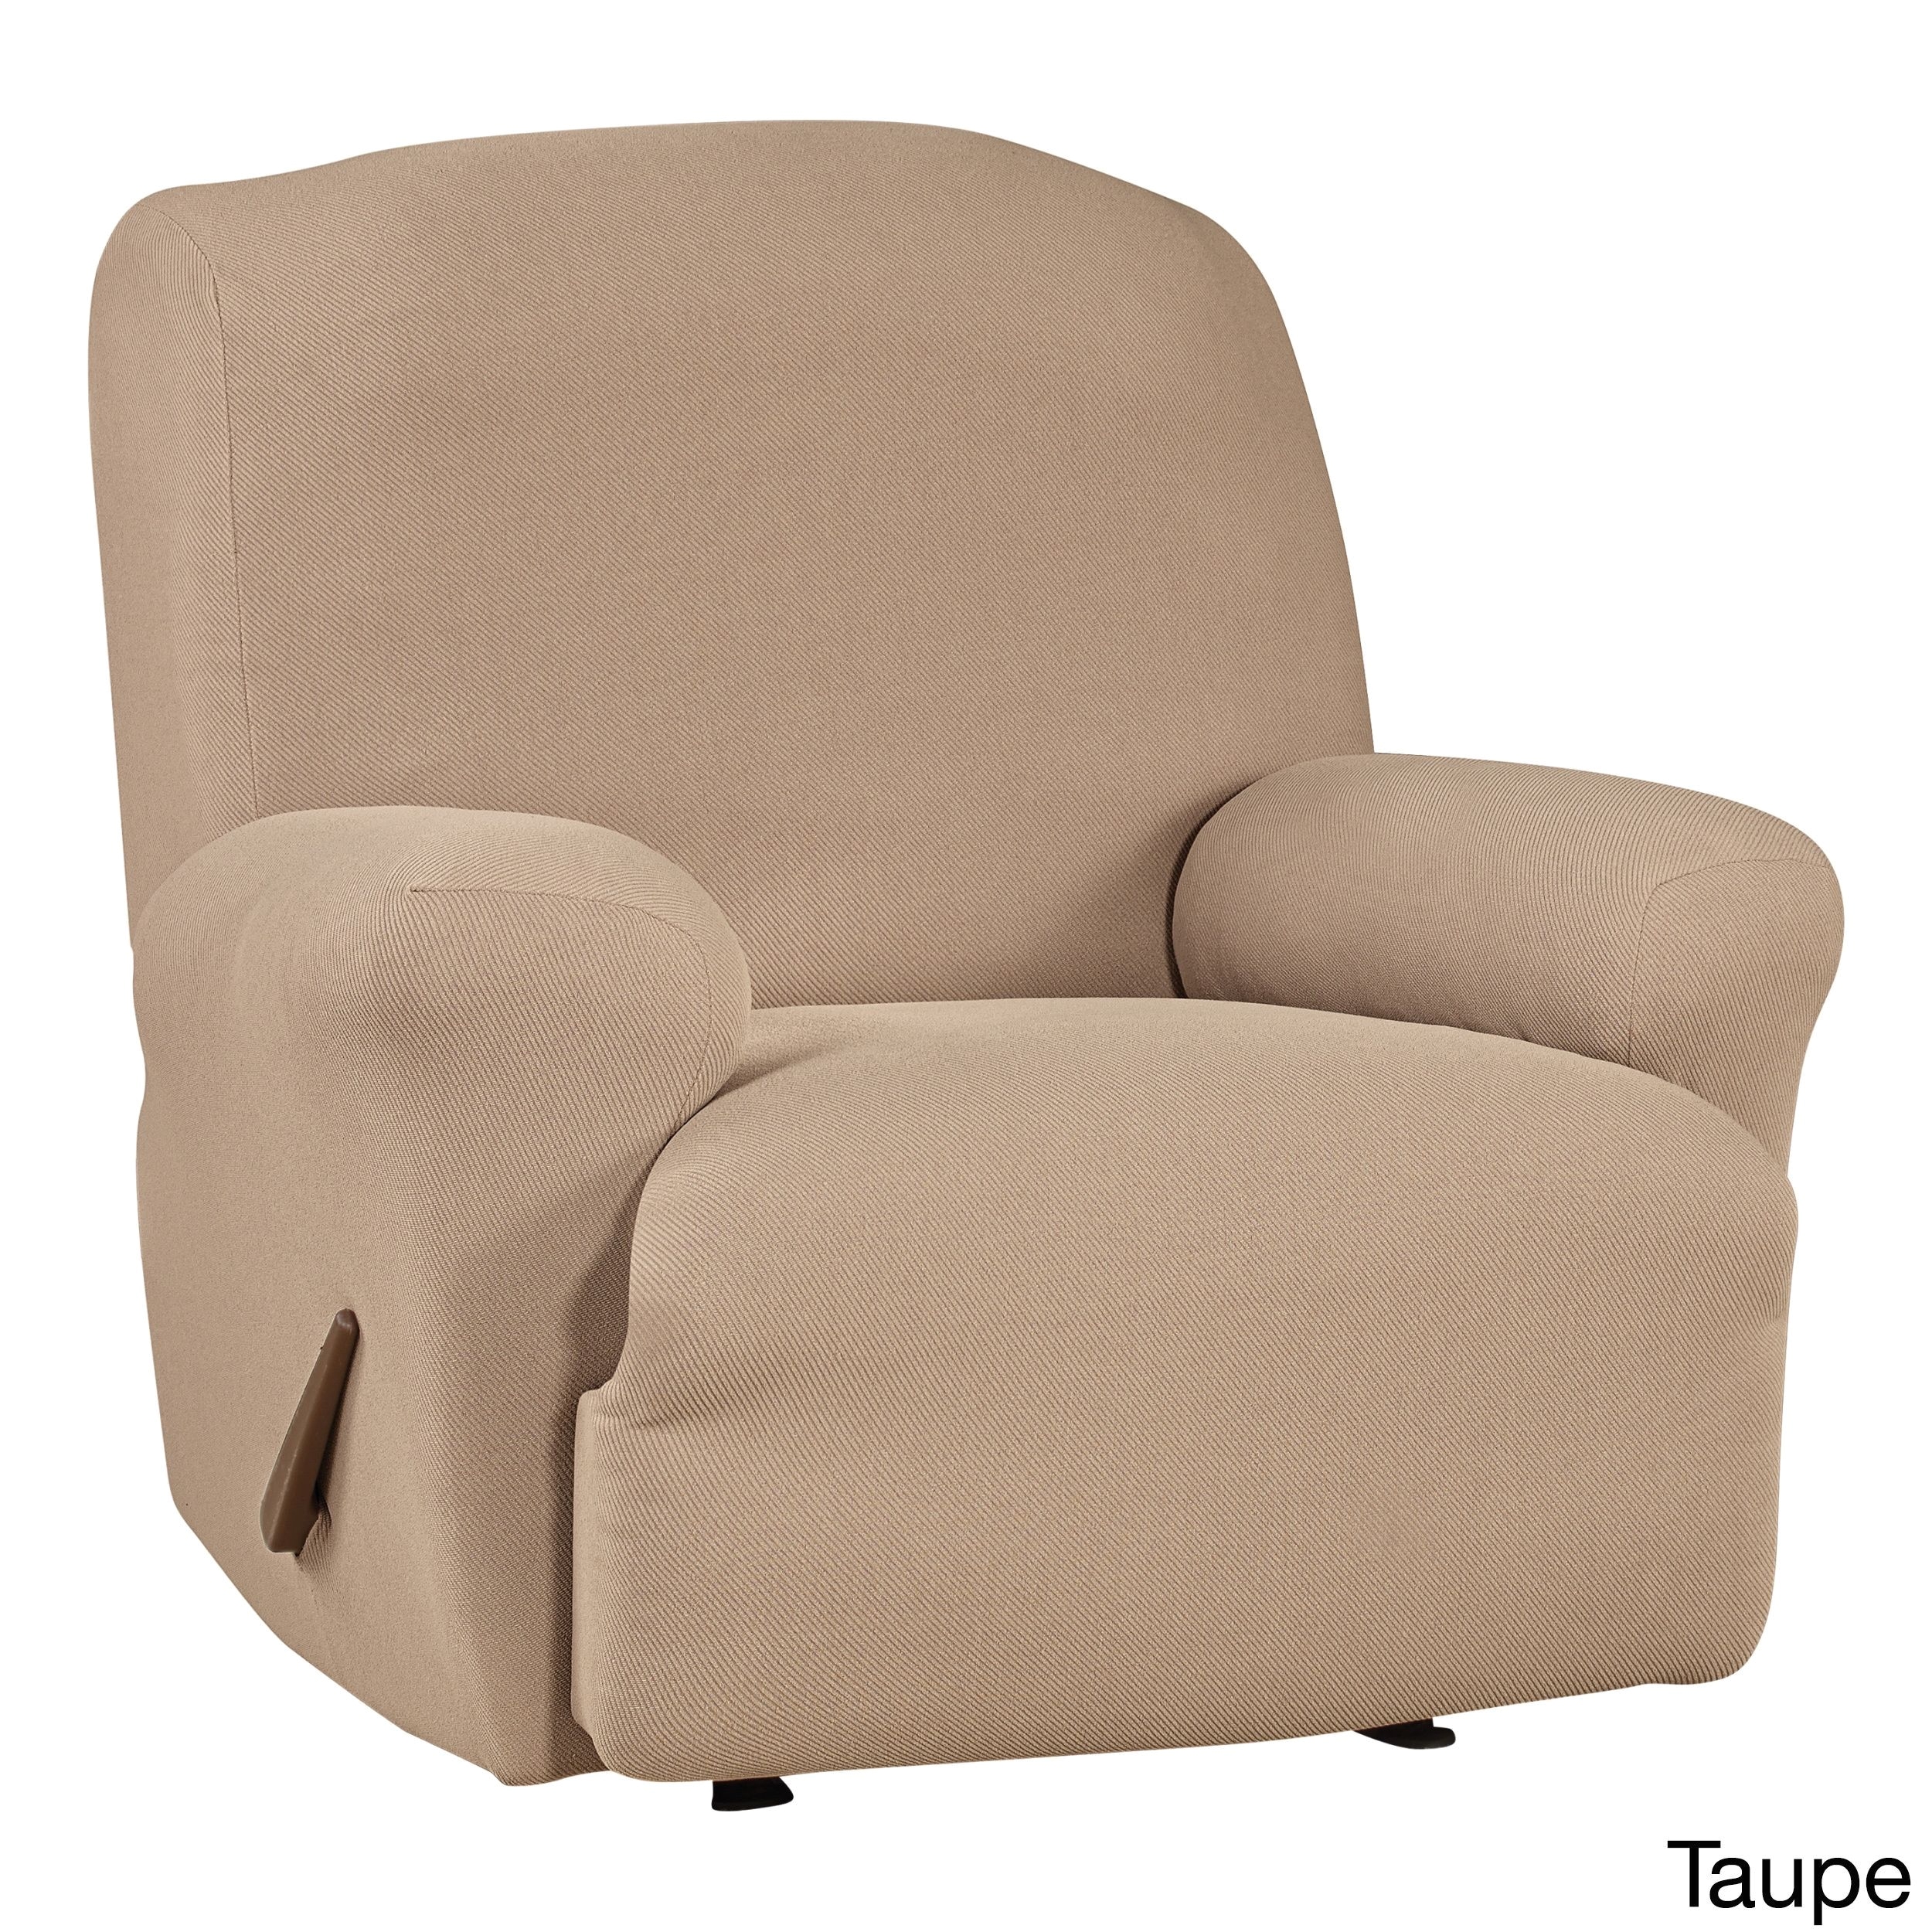 Leather Yoga Chair Stretch sofa Sure Fit Simple Stretch Twill Recliner Slipcover Taupe Brown